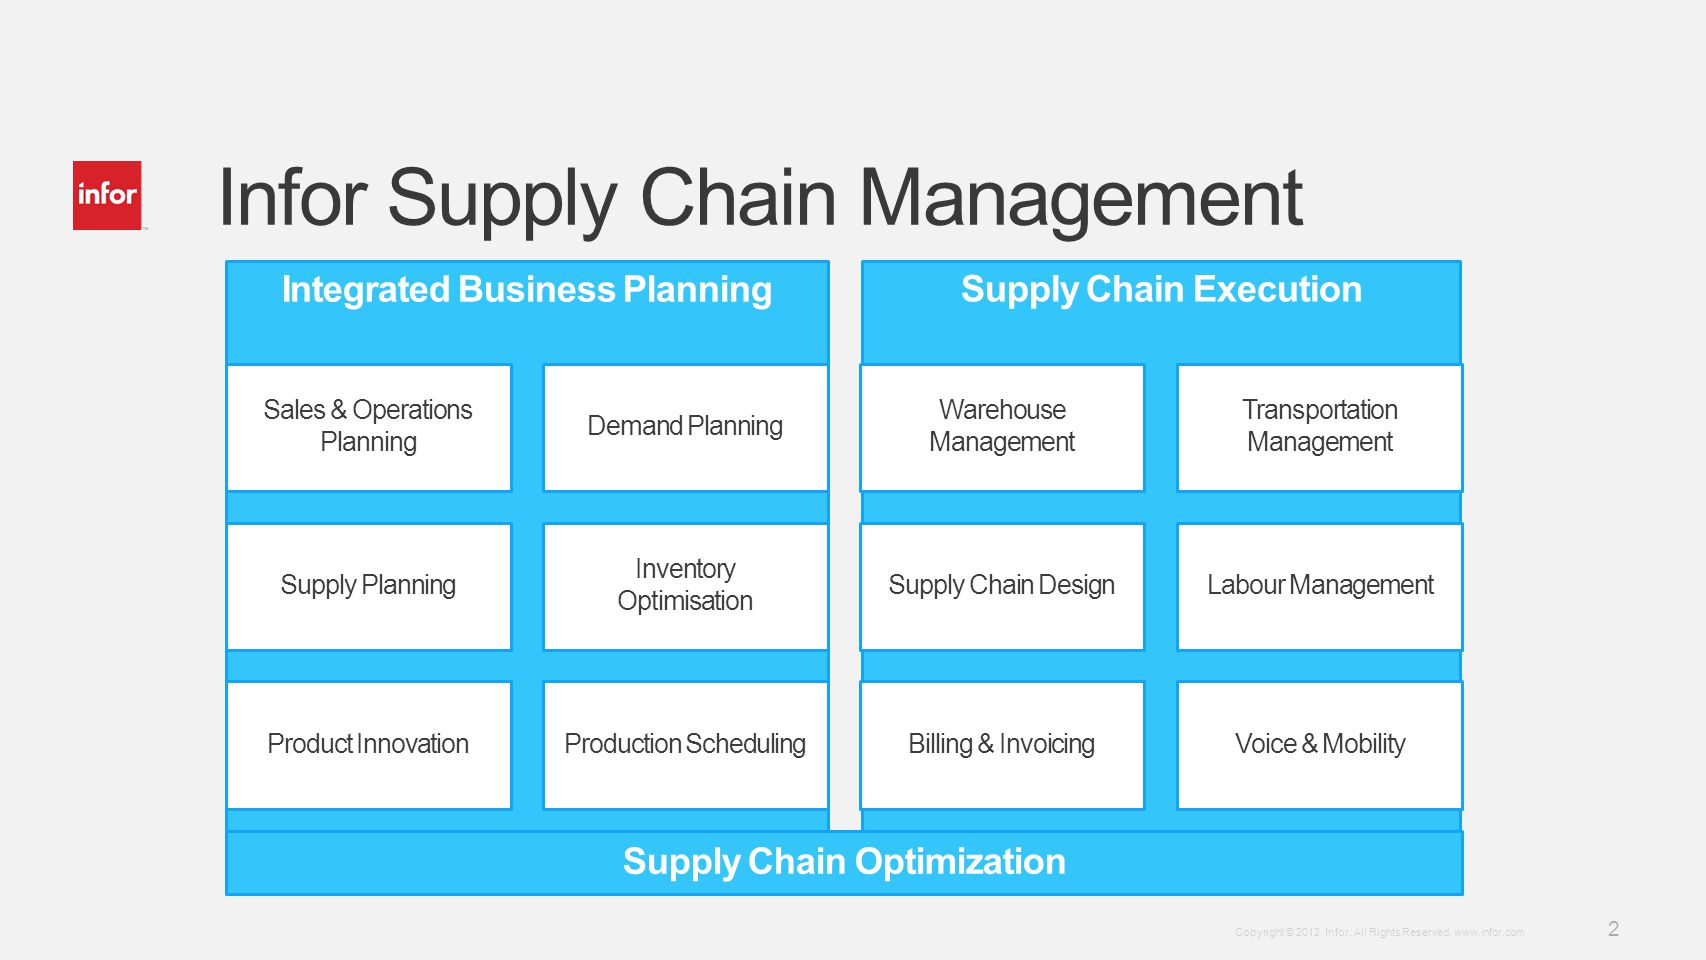 Strengths & Weaknesses of the Supply Chain